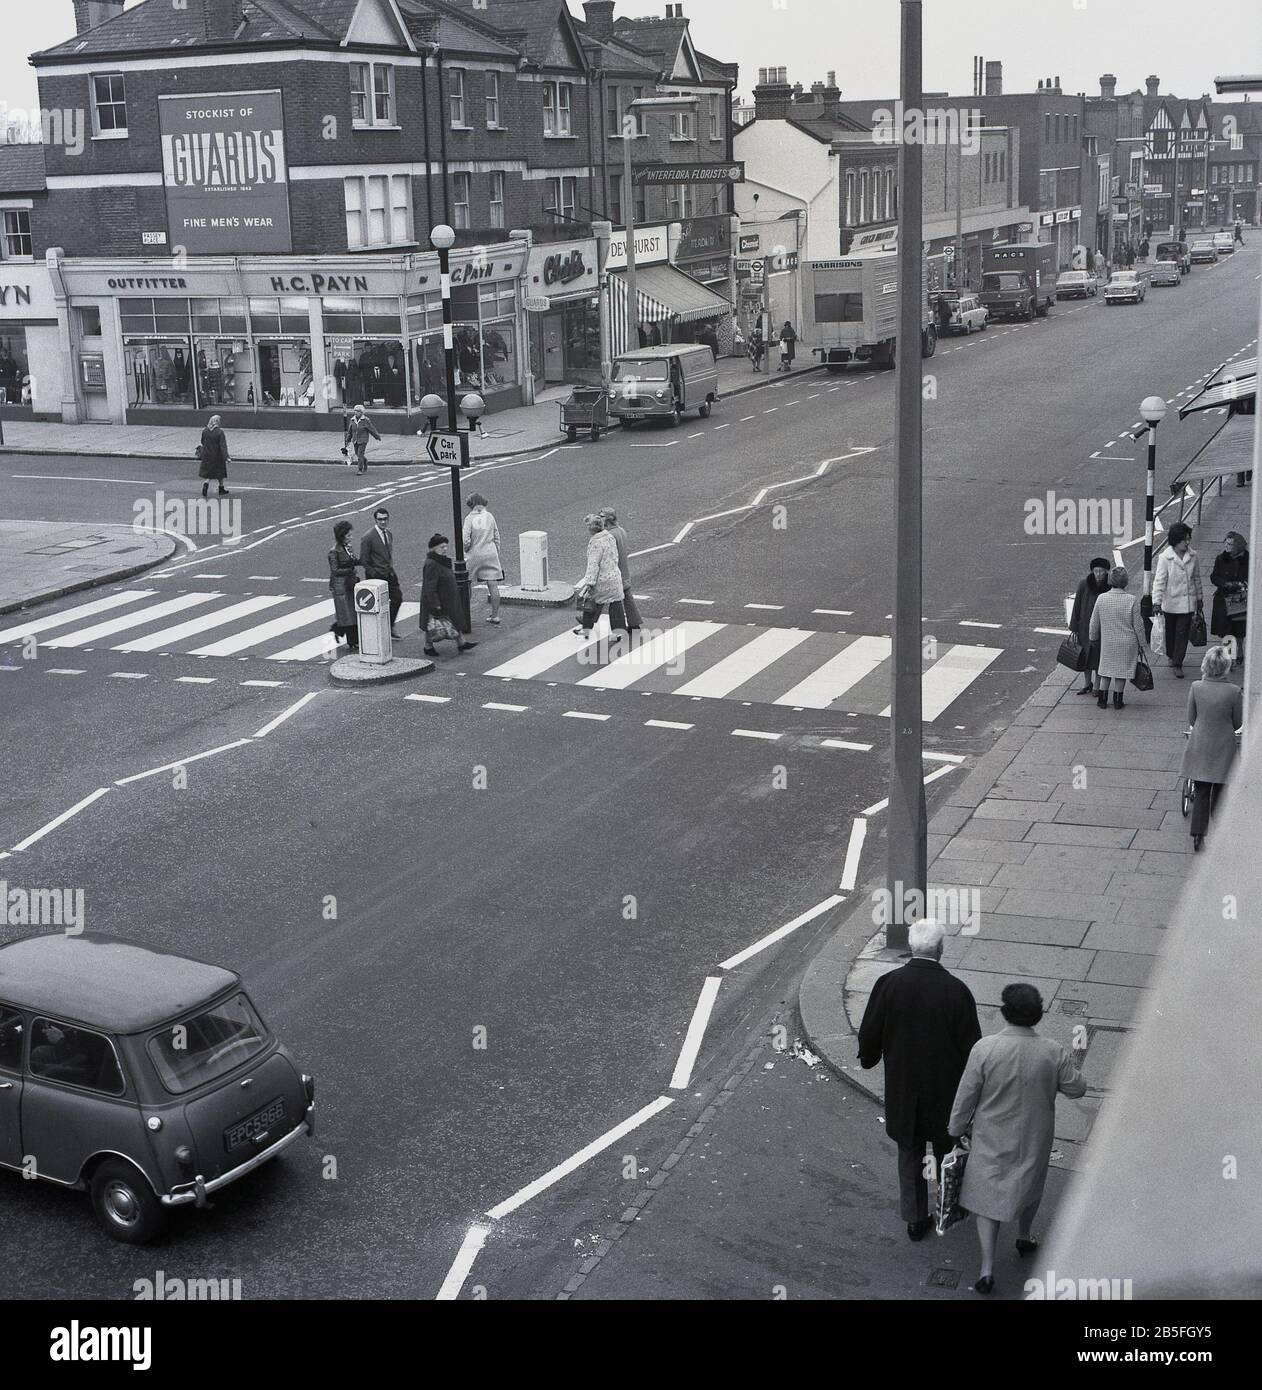 1960s, historical, Eltham High Street, South London, people crossing ...